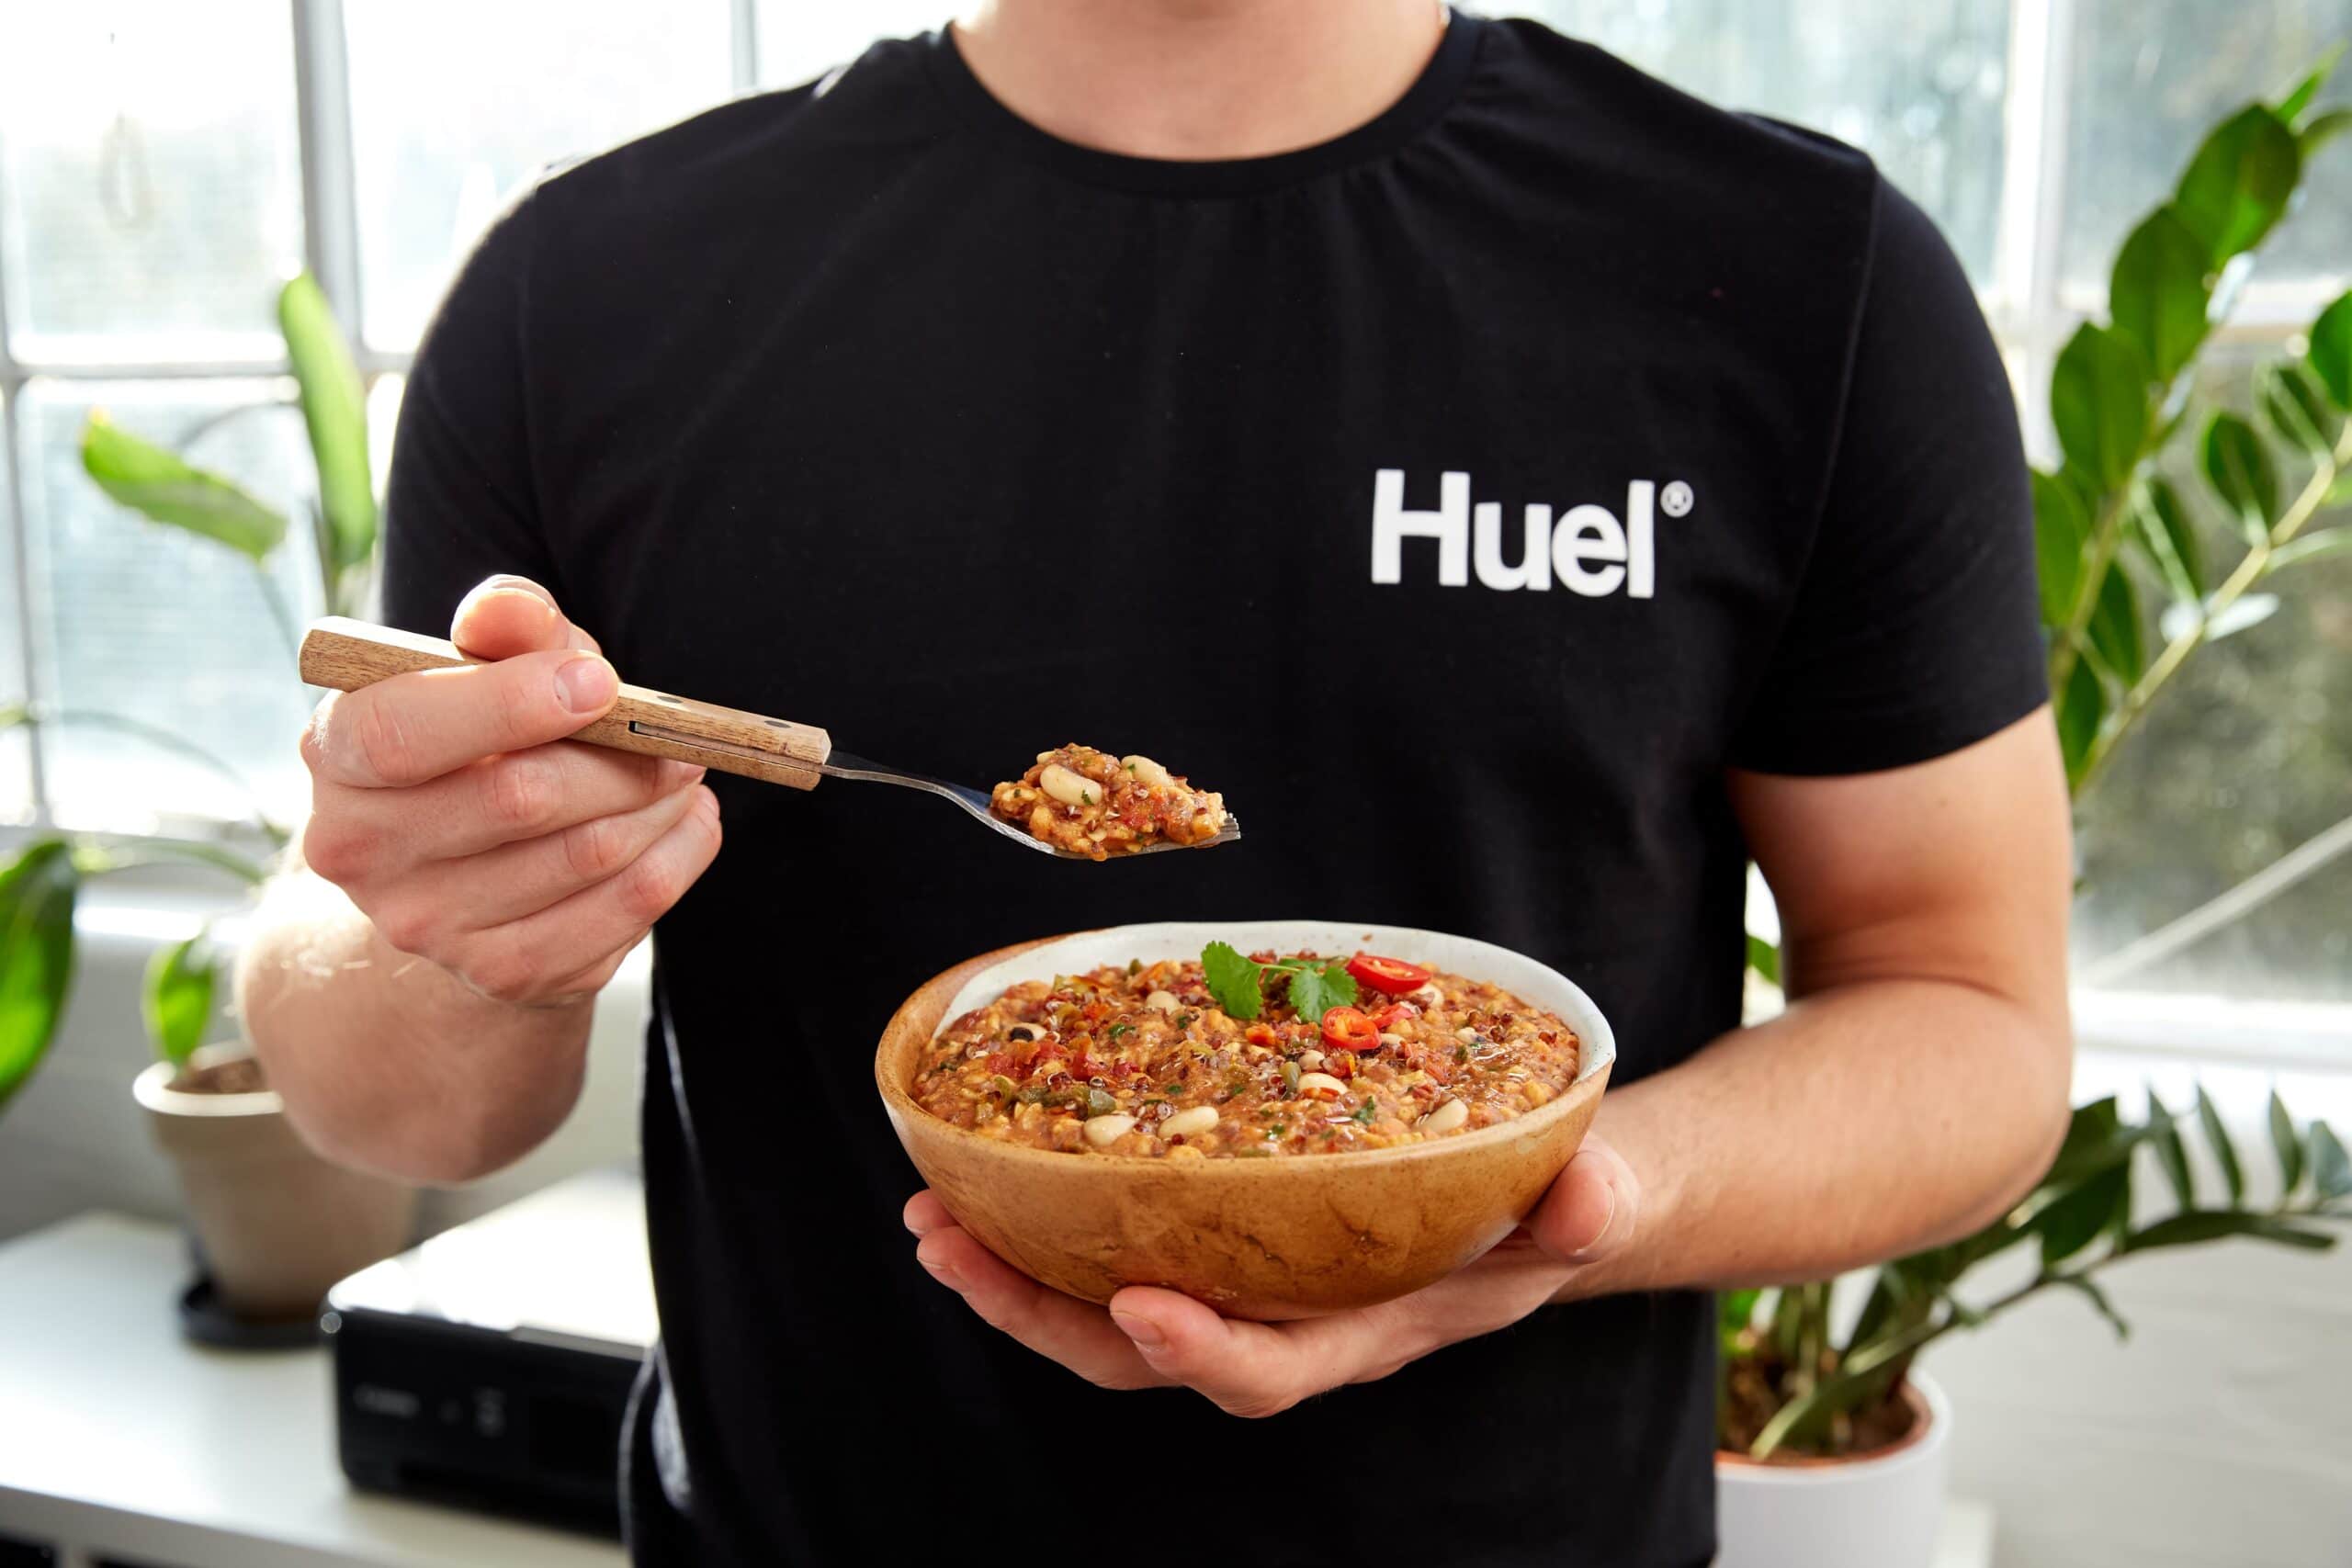 Huel launches new Mexican Chilli flavour Hot & Savoury